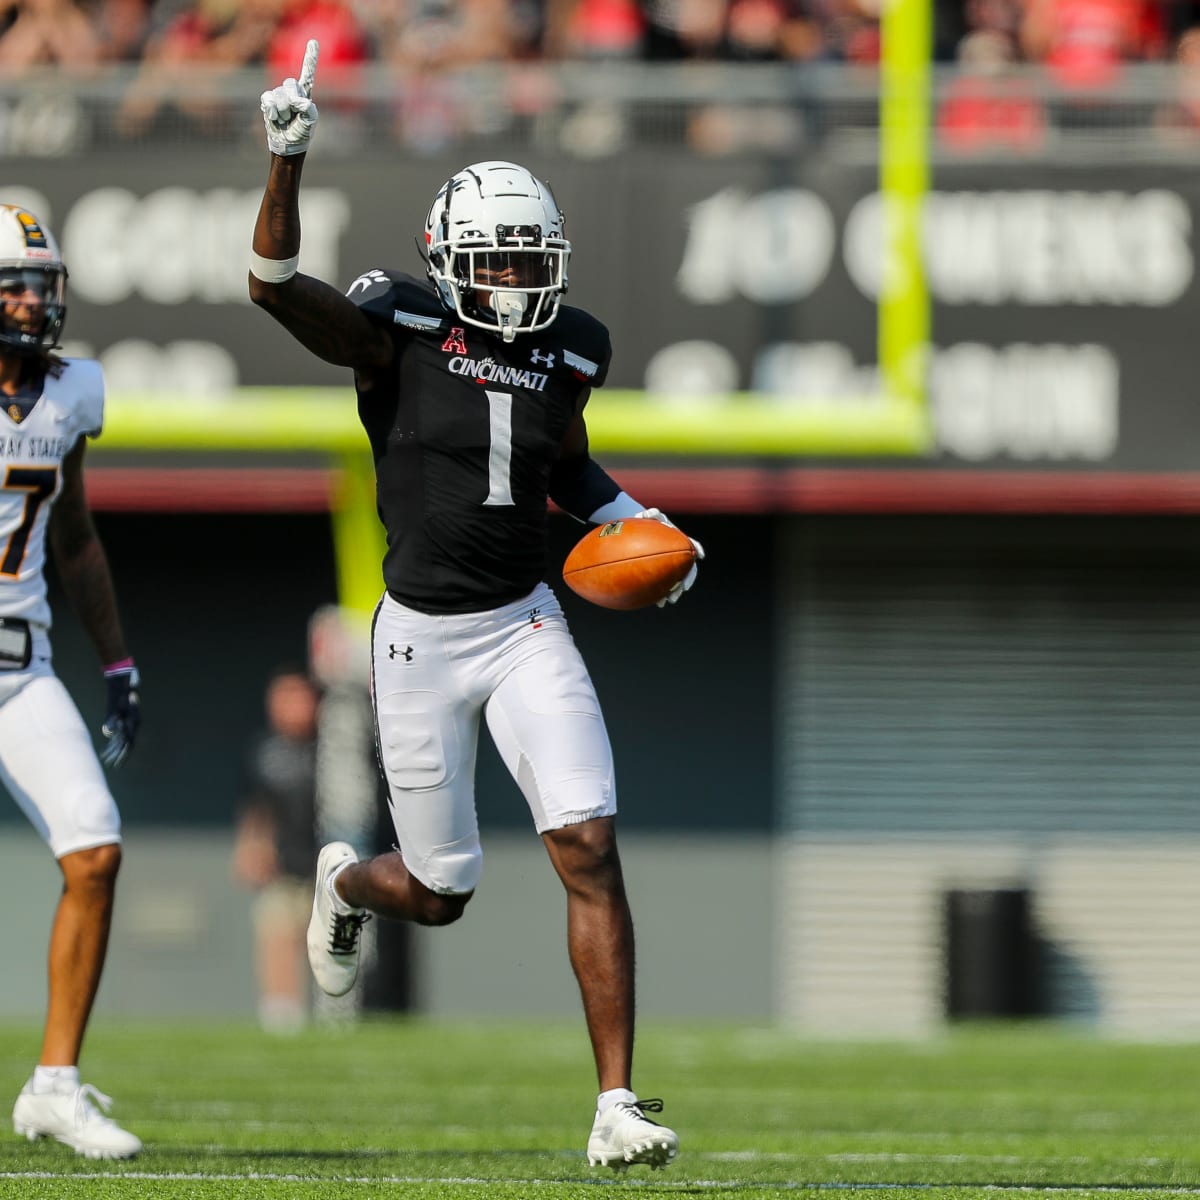 NFL Draft: Top Wide Receiver Declares for the 2022 NFL Draft - Visit NFL  Draft on Sports Illustrated, the latest news coverage, with rankings for  NFL Draft prospects, College Football, Dynasty and